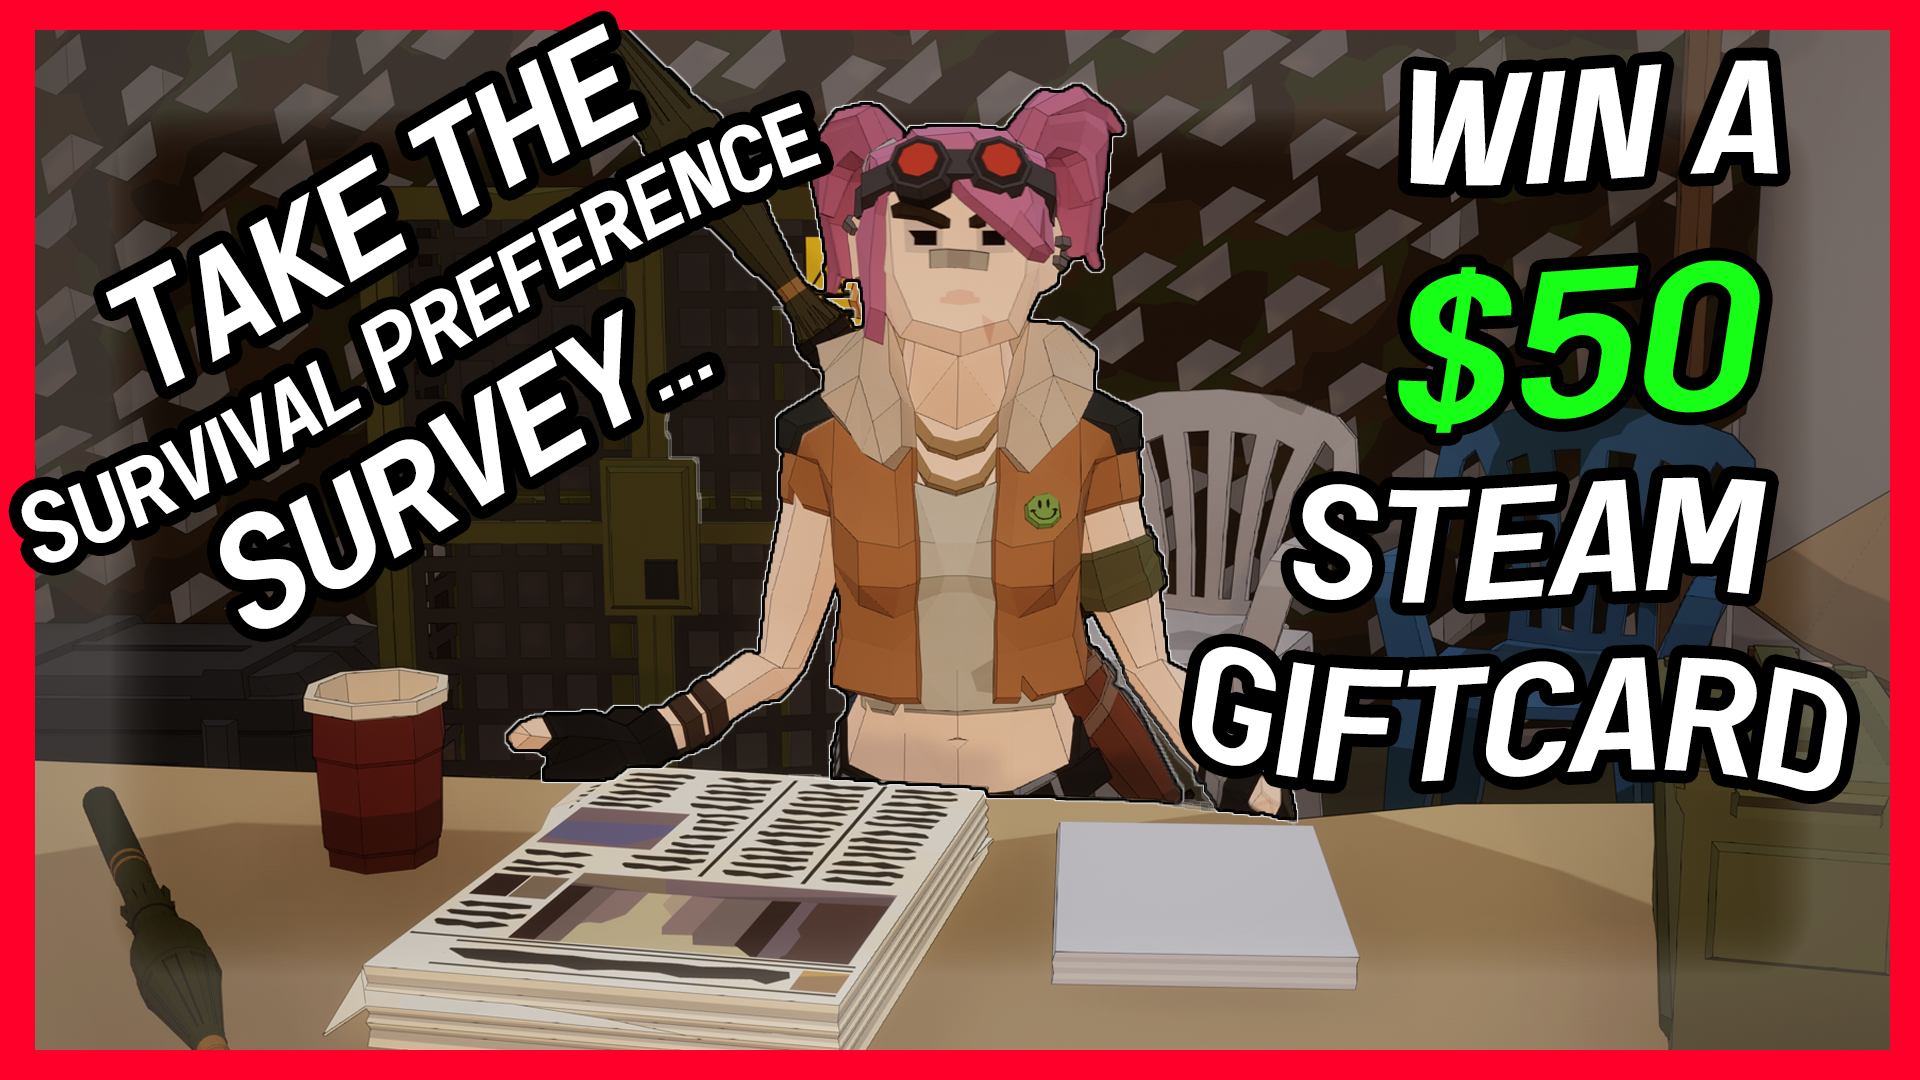 Scarina the in-game trader presenting a survey that survivors can take for a chance to win a $50 Steam giftcard!